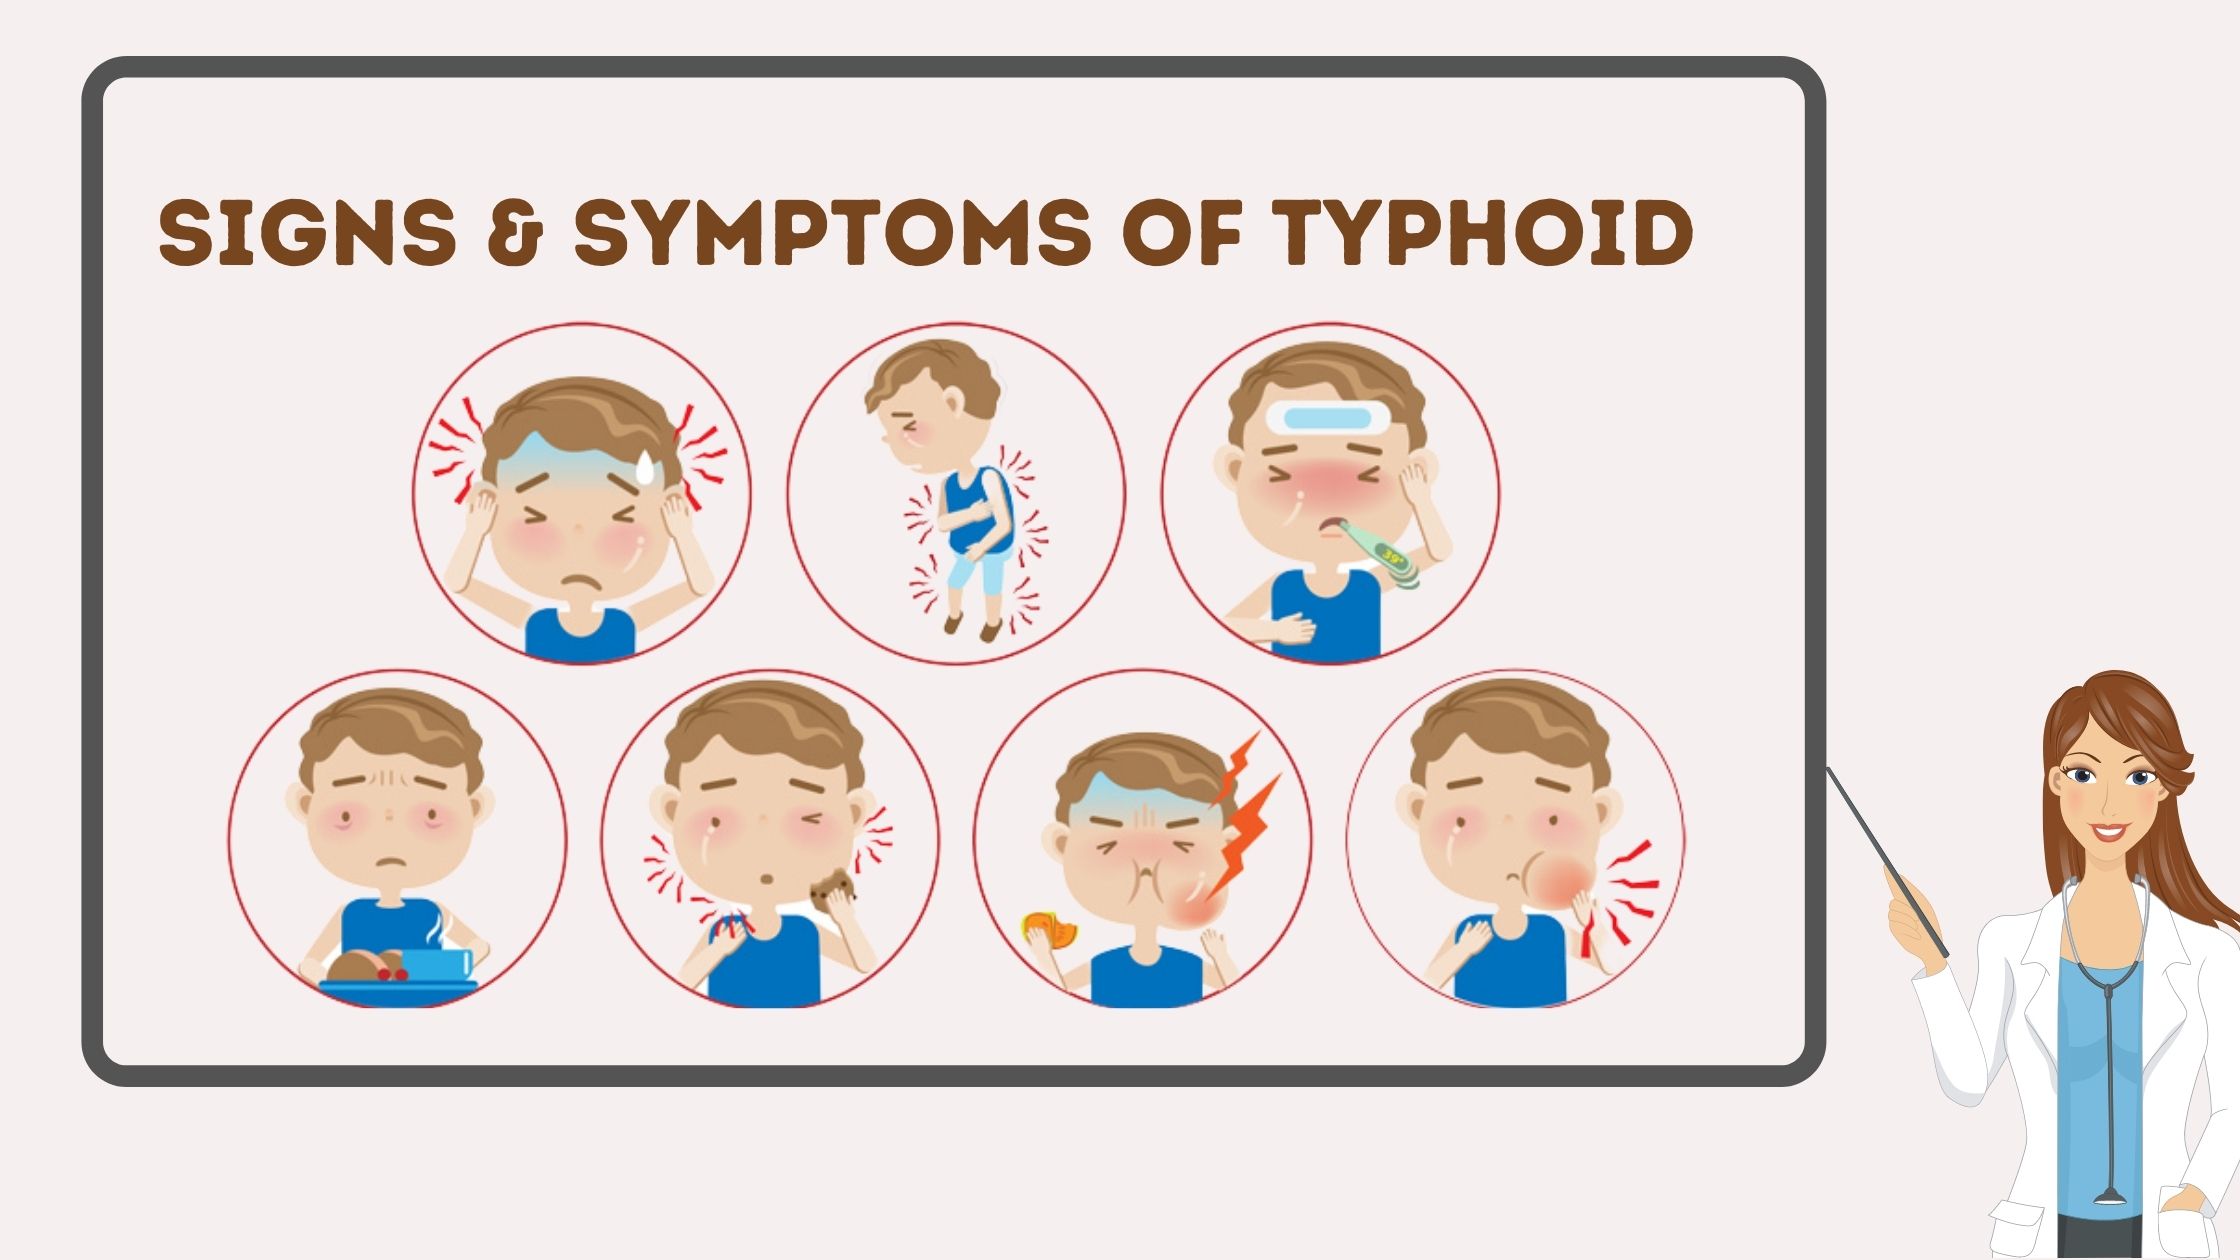 Signs and symptoms of typhoid